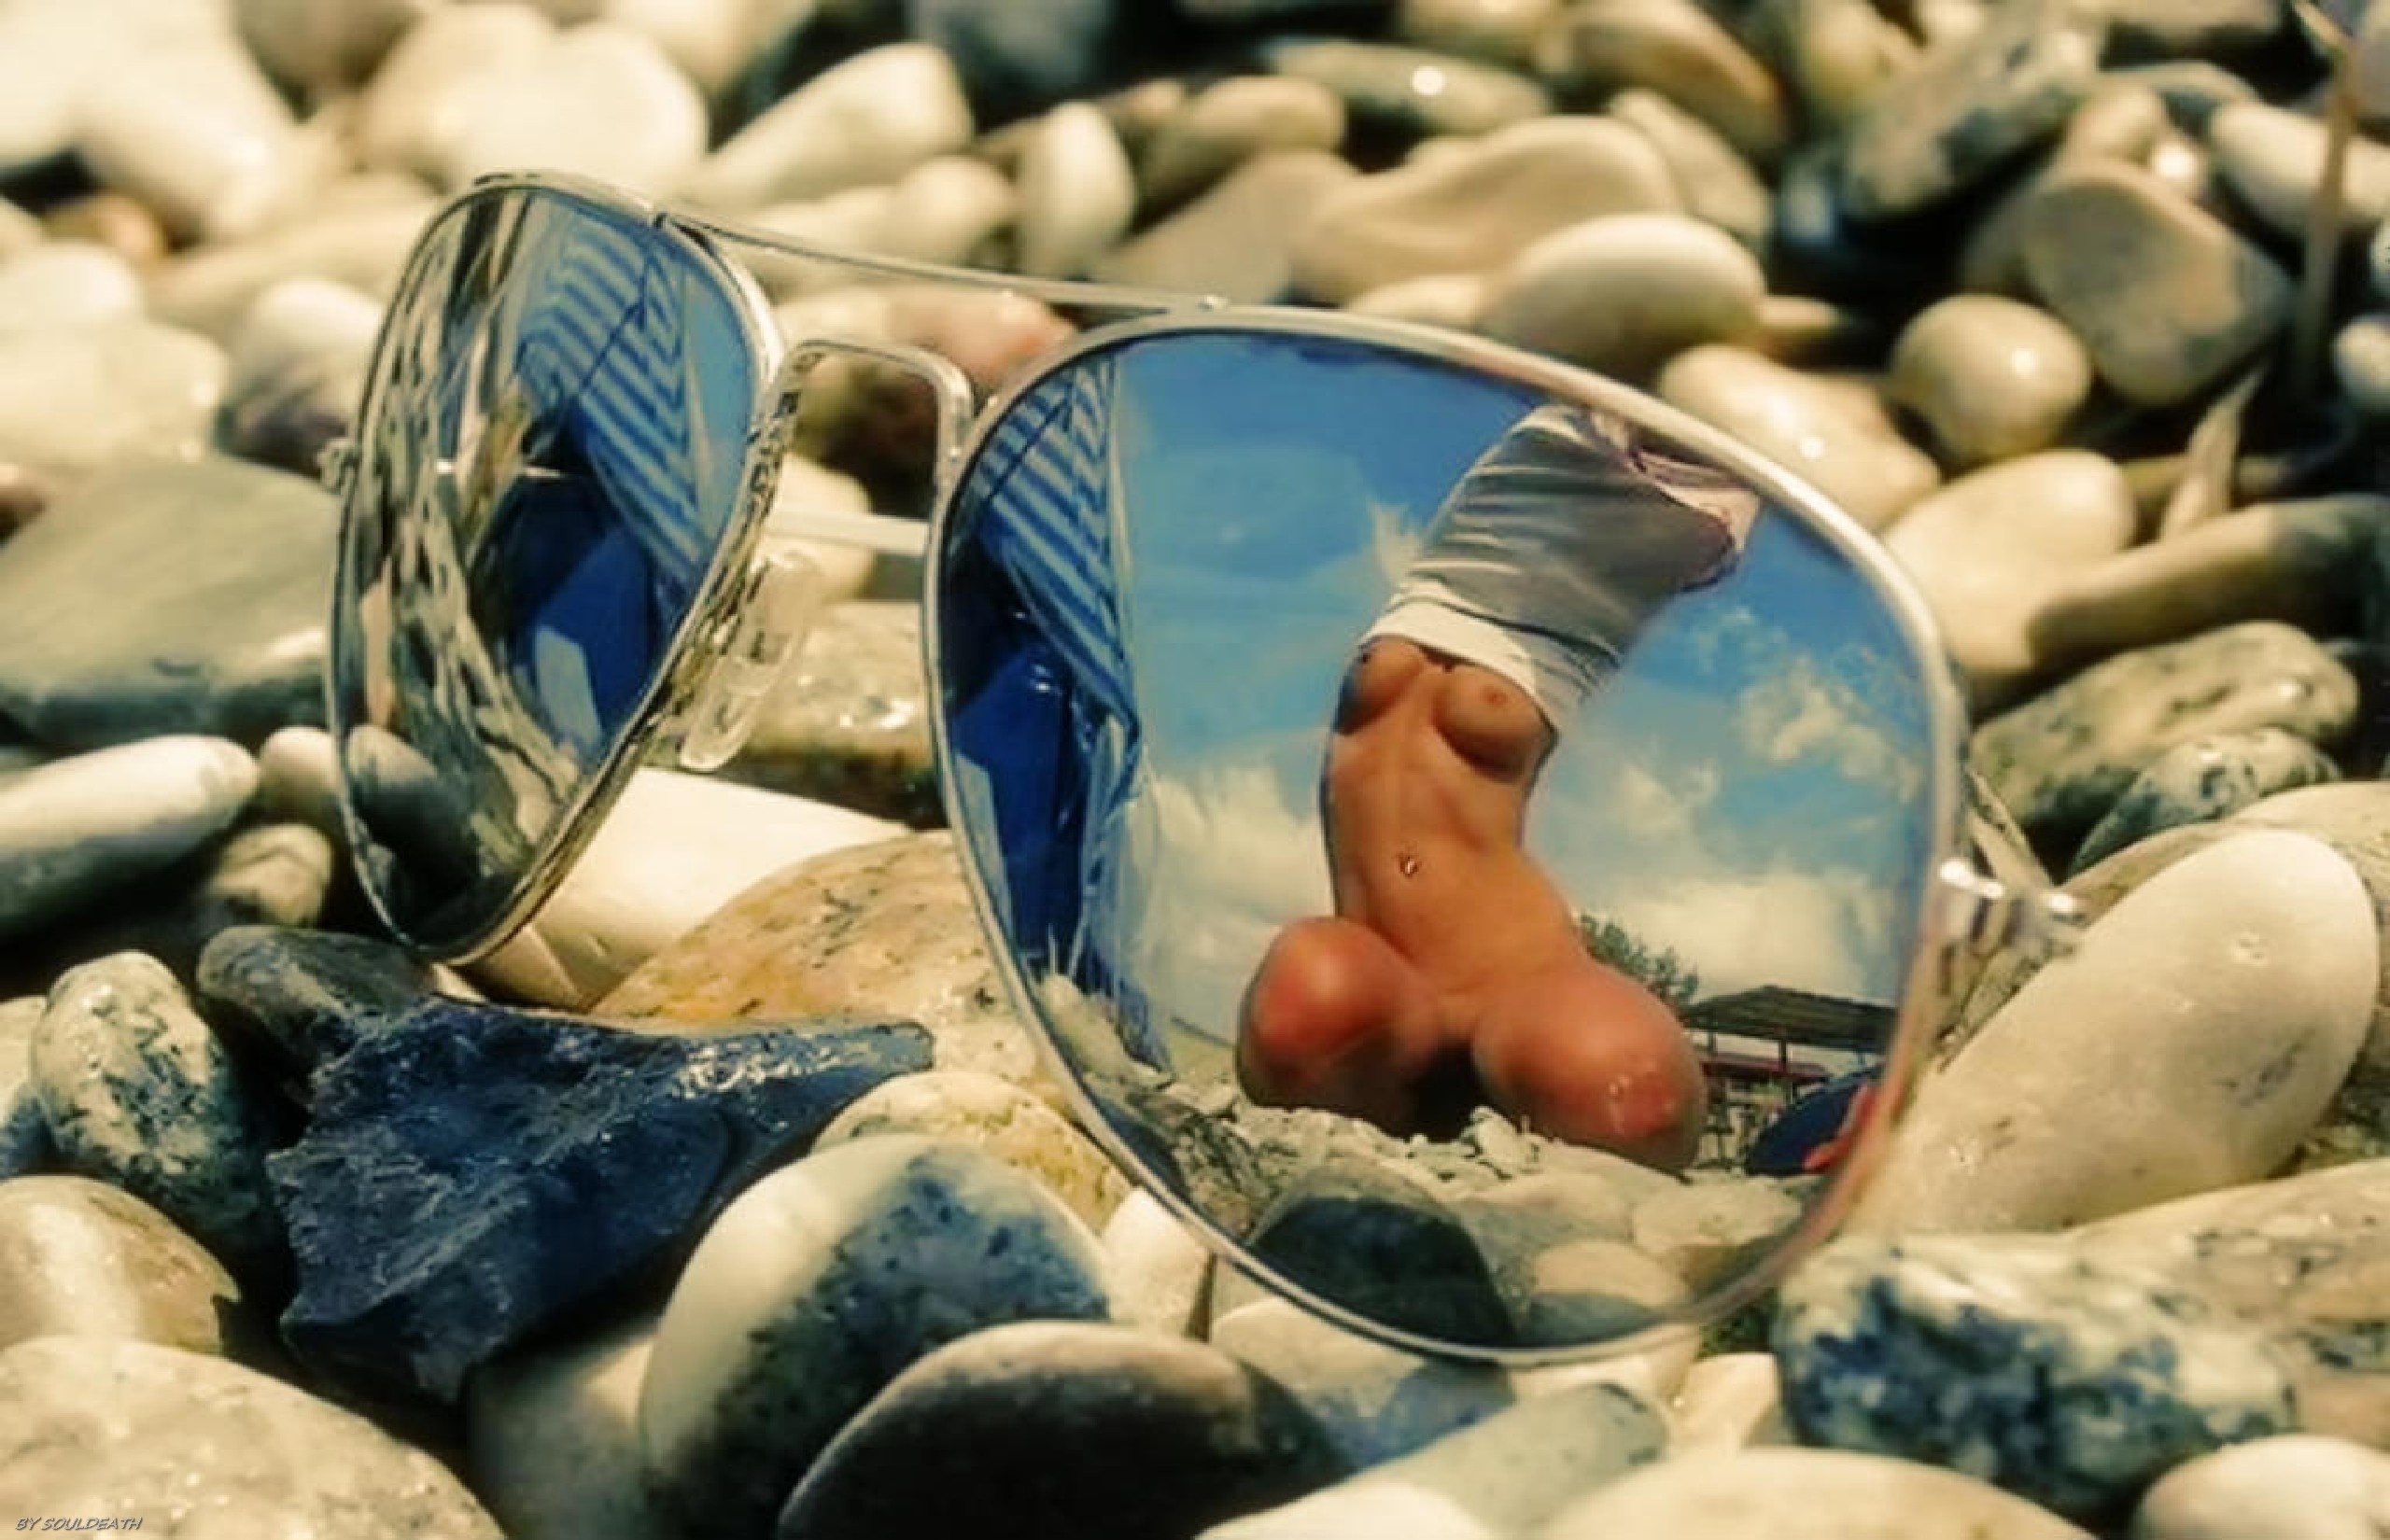 Download photo 1920x1080, erotic, oddies, nude, art, sunglasses, reflection,  tits out, funny - ID: 138236